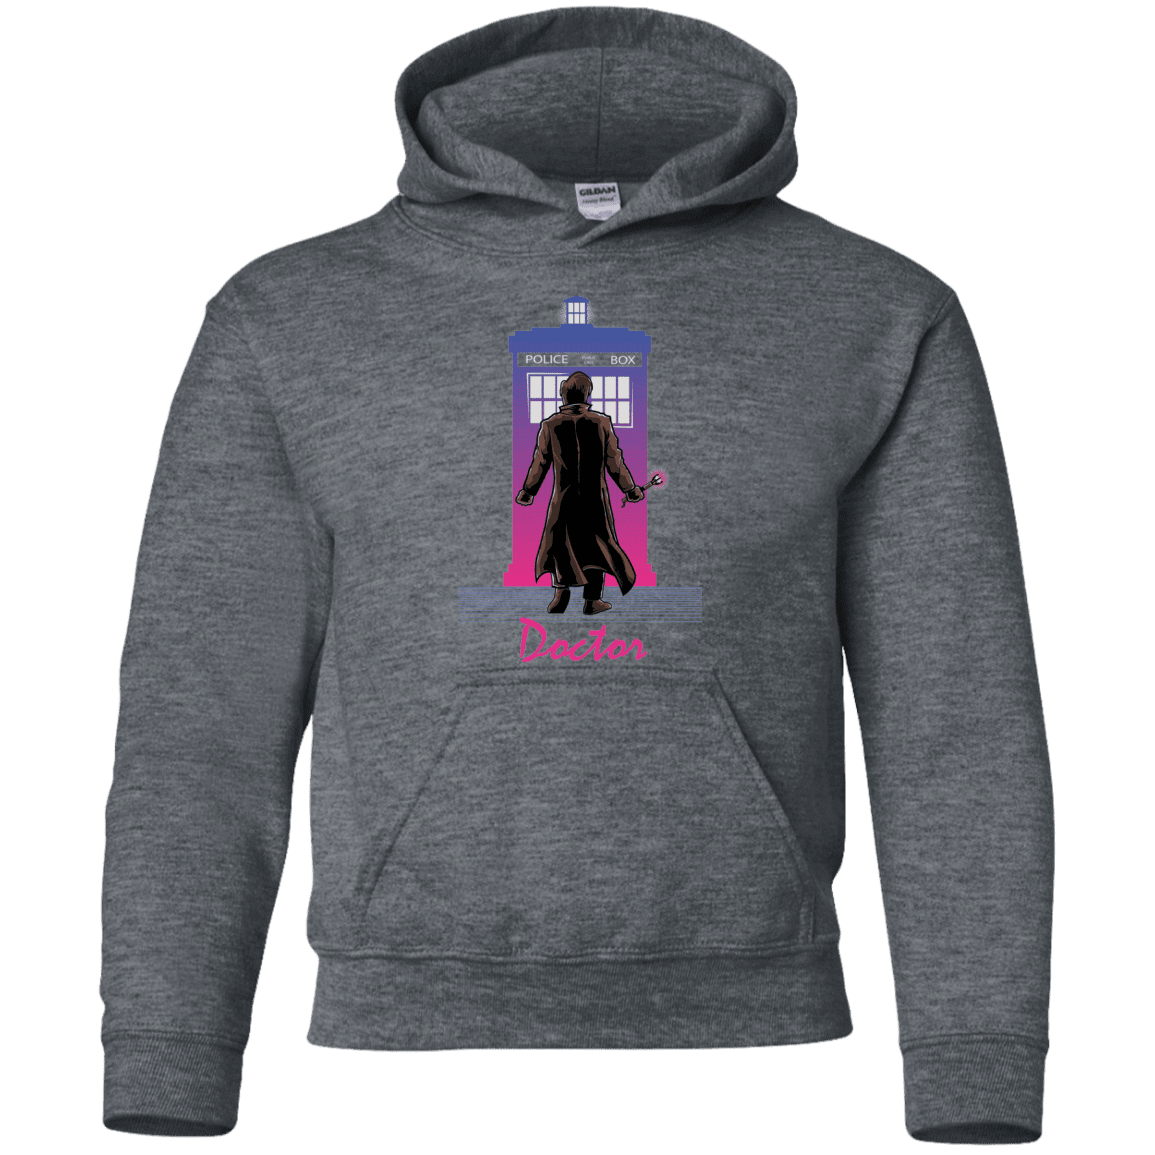 DOCTOR DRIVE Youth Hoodie